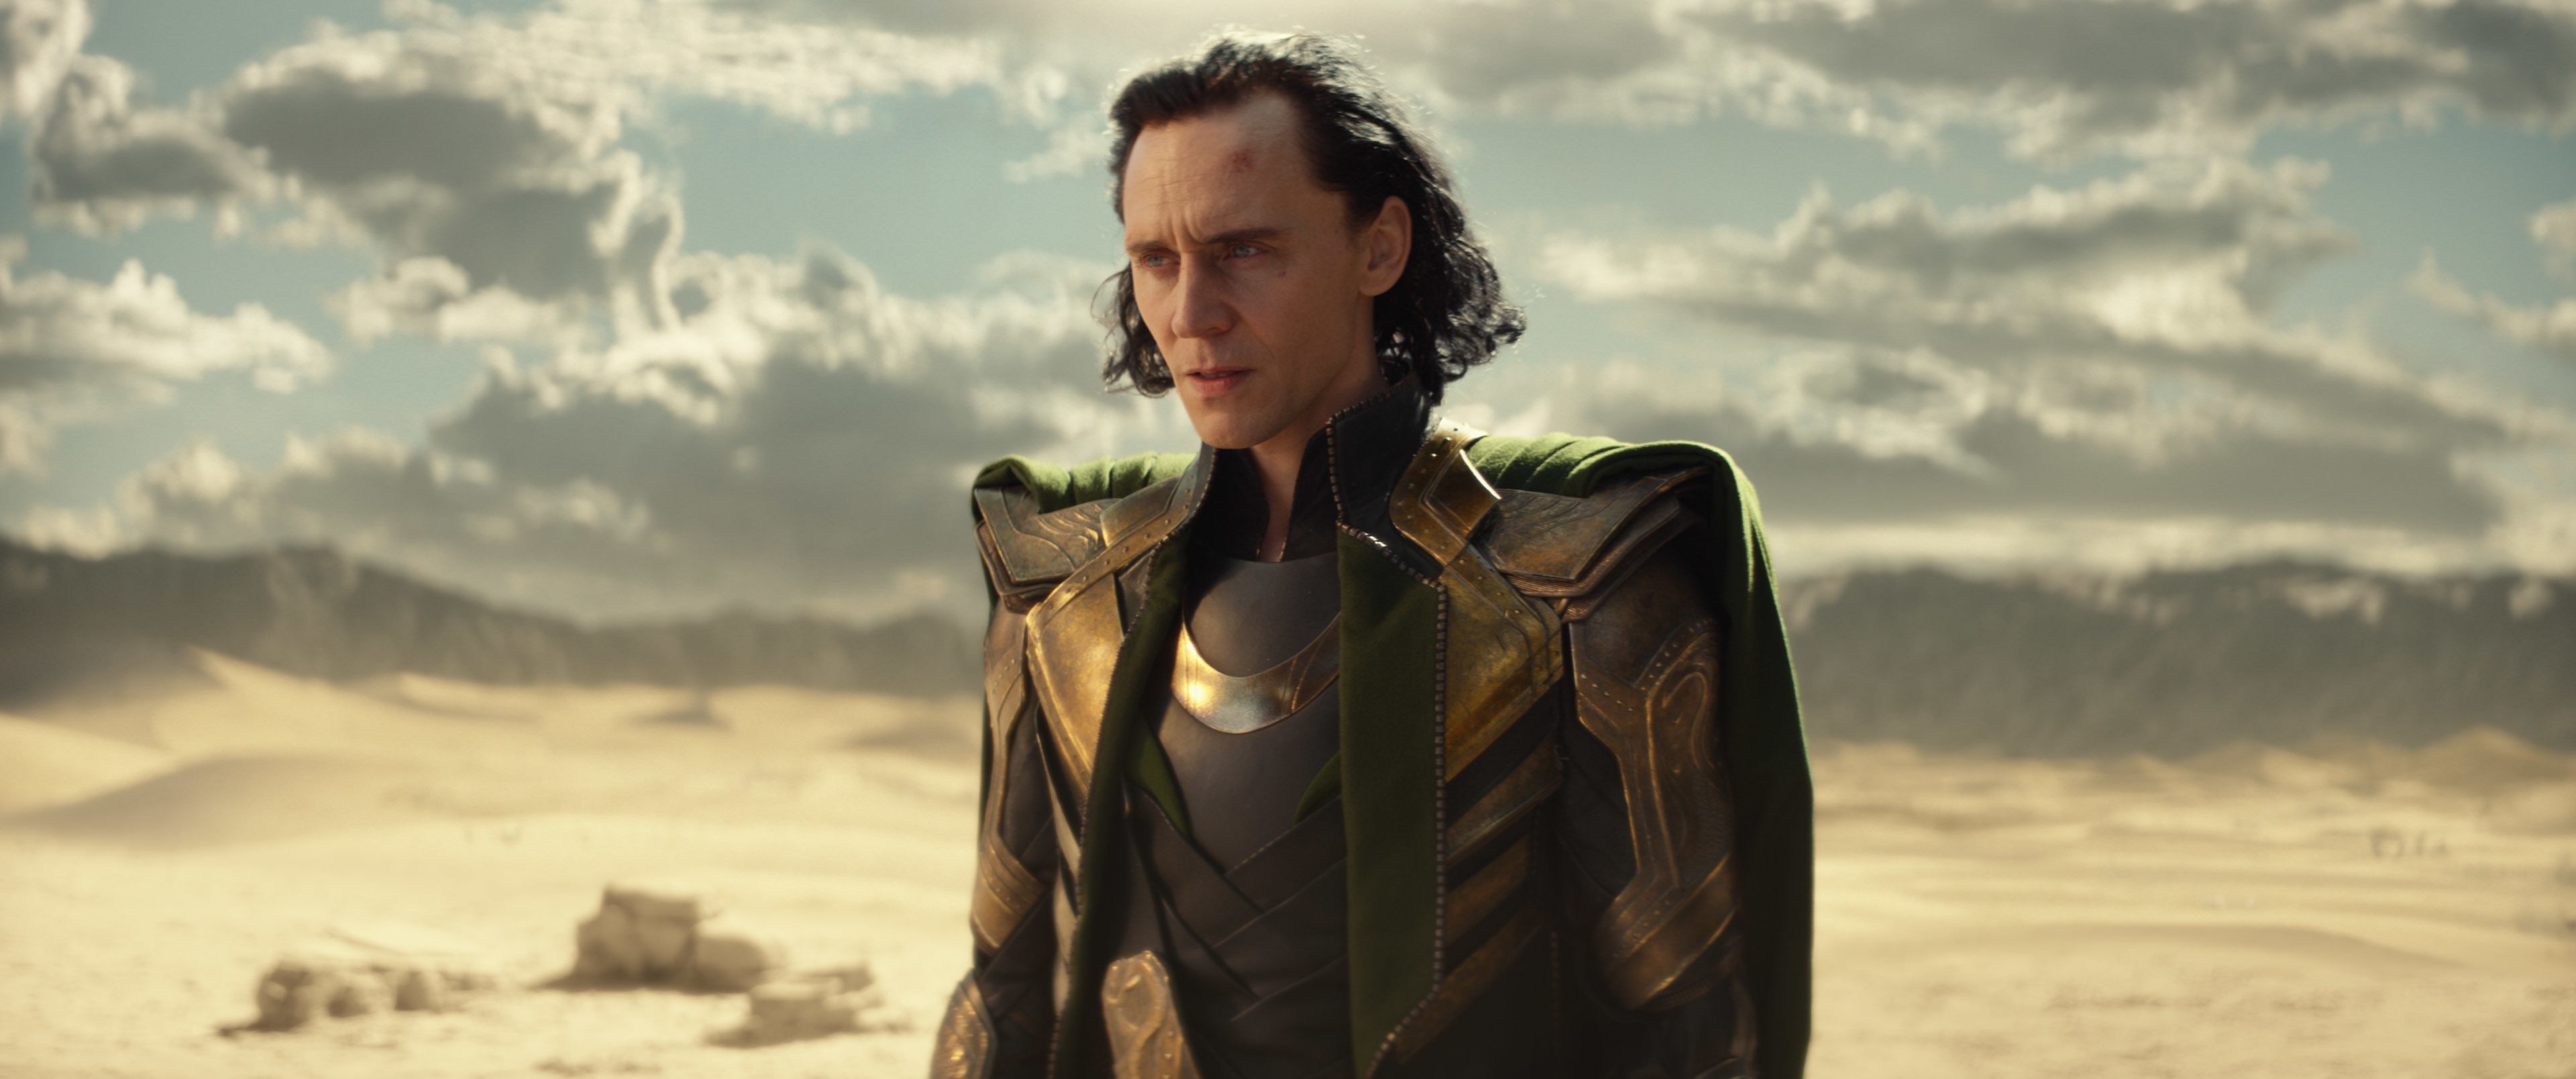 ‘Loki’ had the Top Opening Weekend of Q2 So Far, Followed by ‘The Handmaid’s Tale’